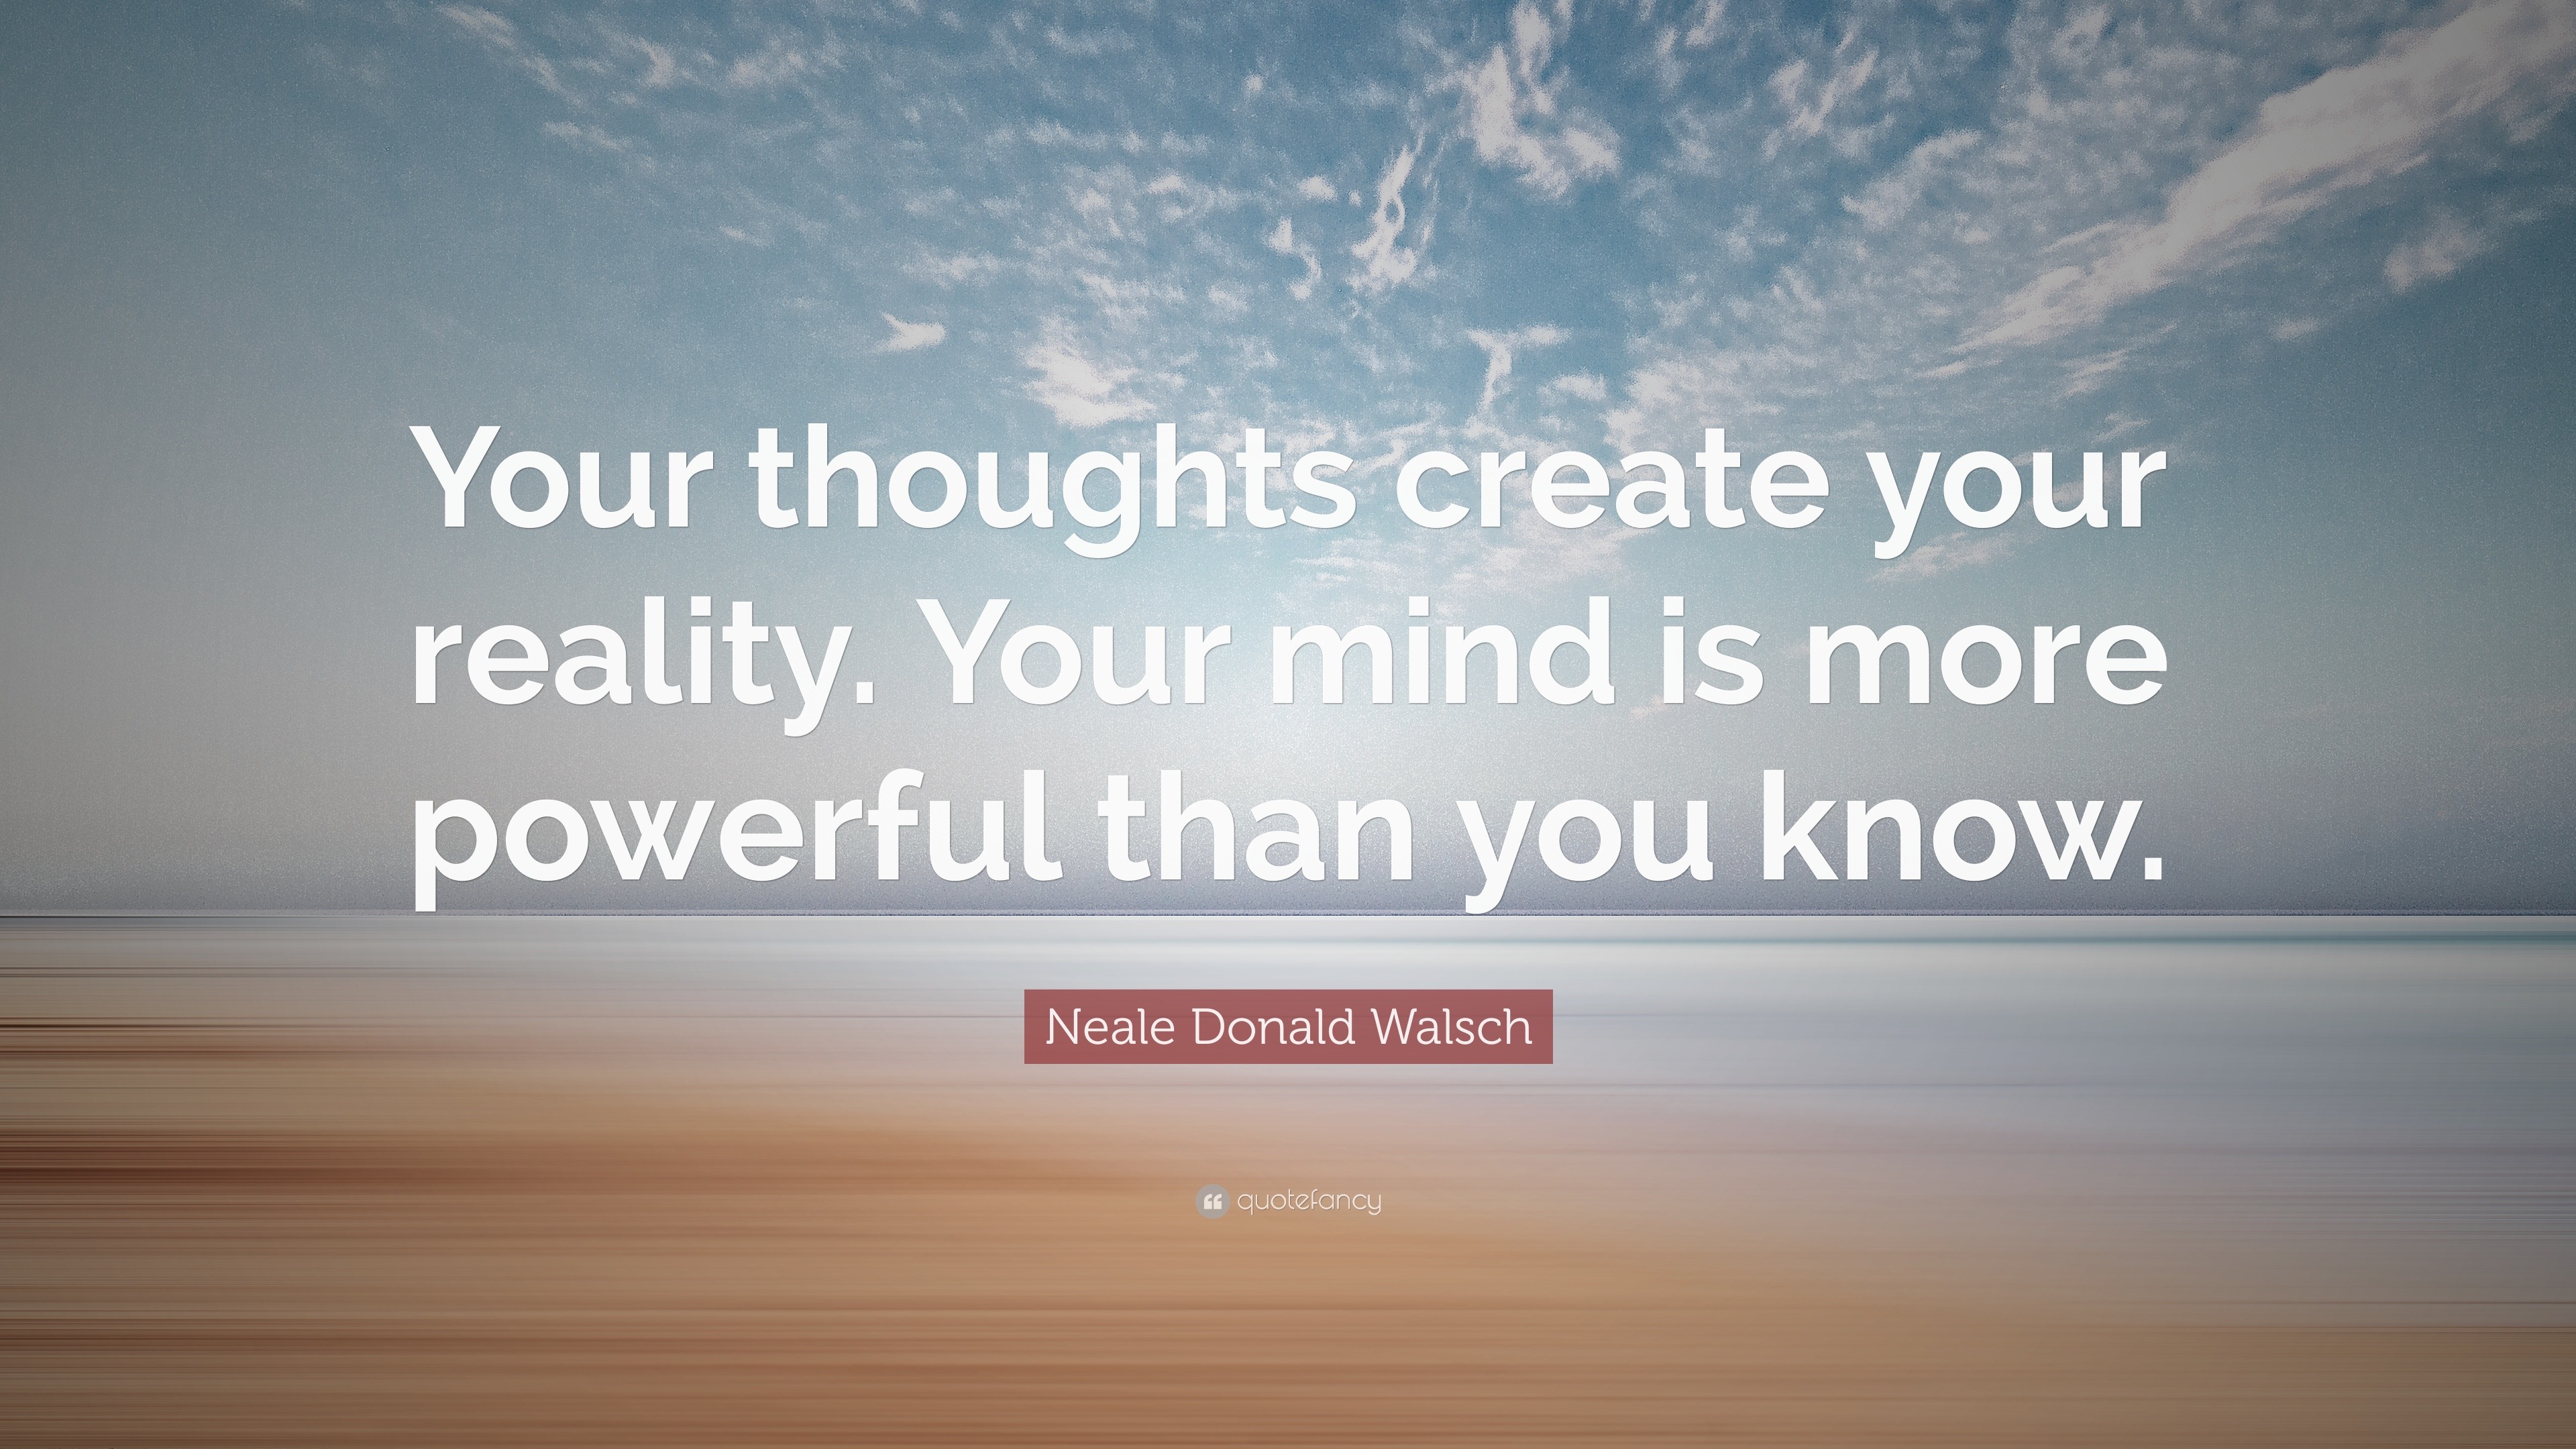 1810261 Neale Donald Walsch Quote Your thoughts create your reality Your